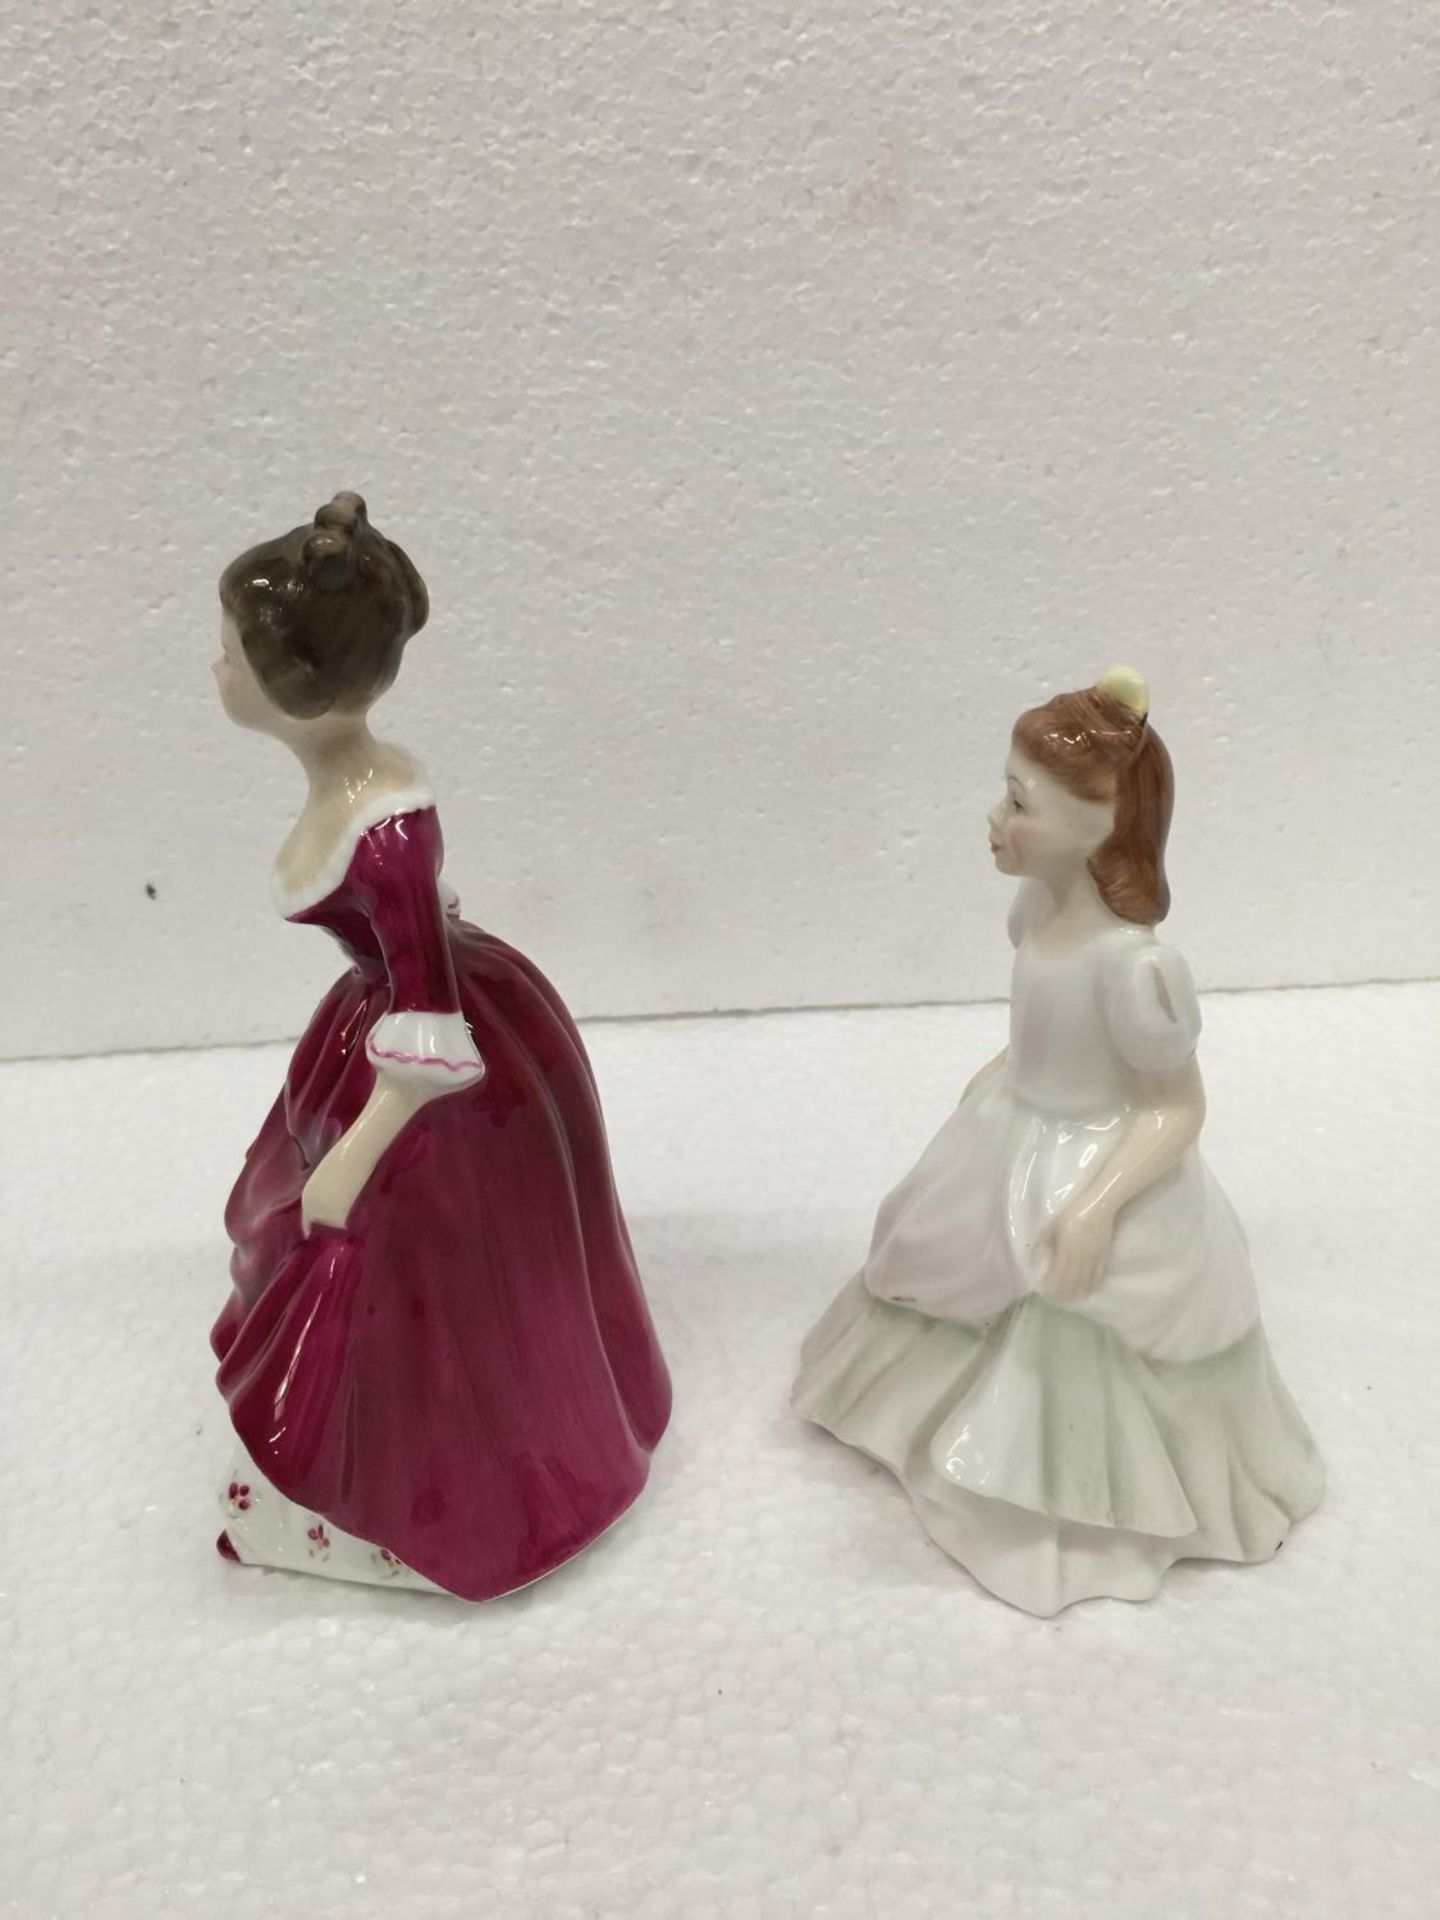 A ROYAL DOULTON SMALL FIGURINE "KERRY" 13 CM TOGETHER WITH A FURTHER FINE BONE CHINA FIGURINE "CARA" - Image 4 of 5